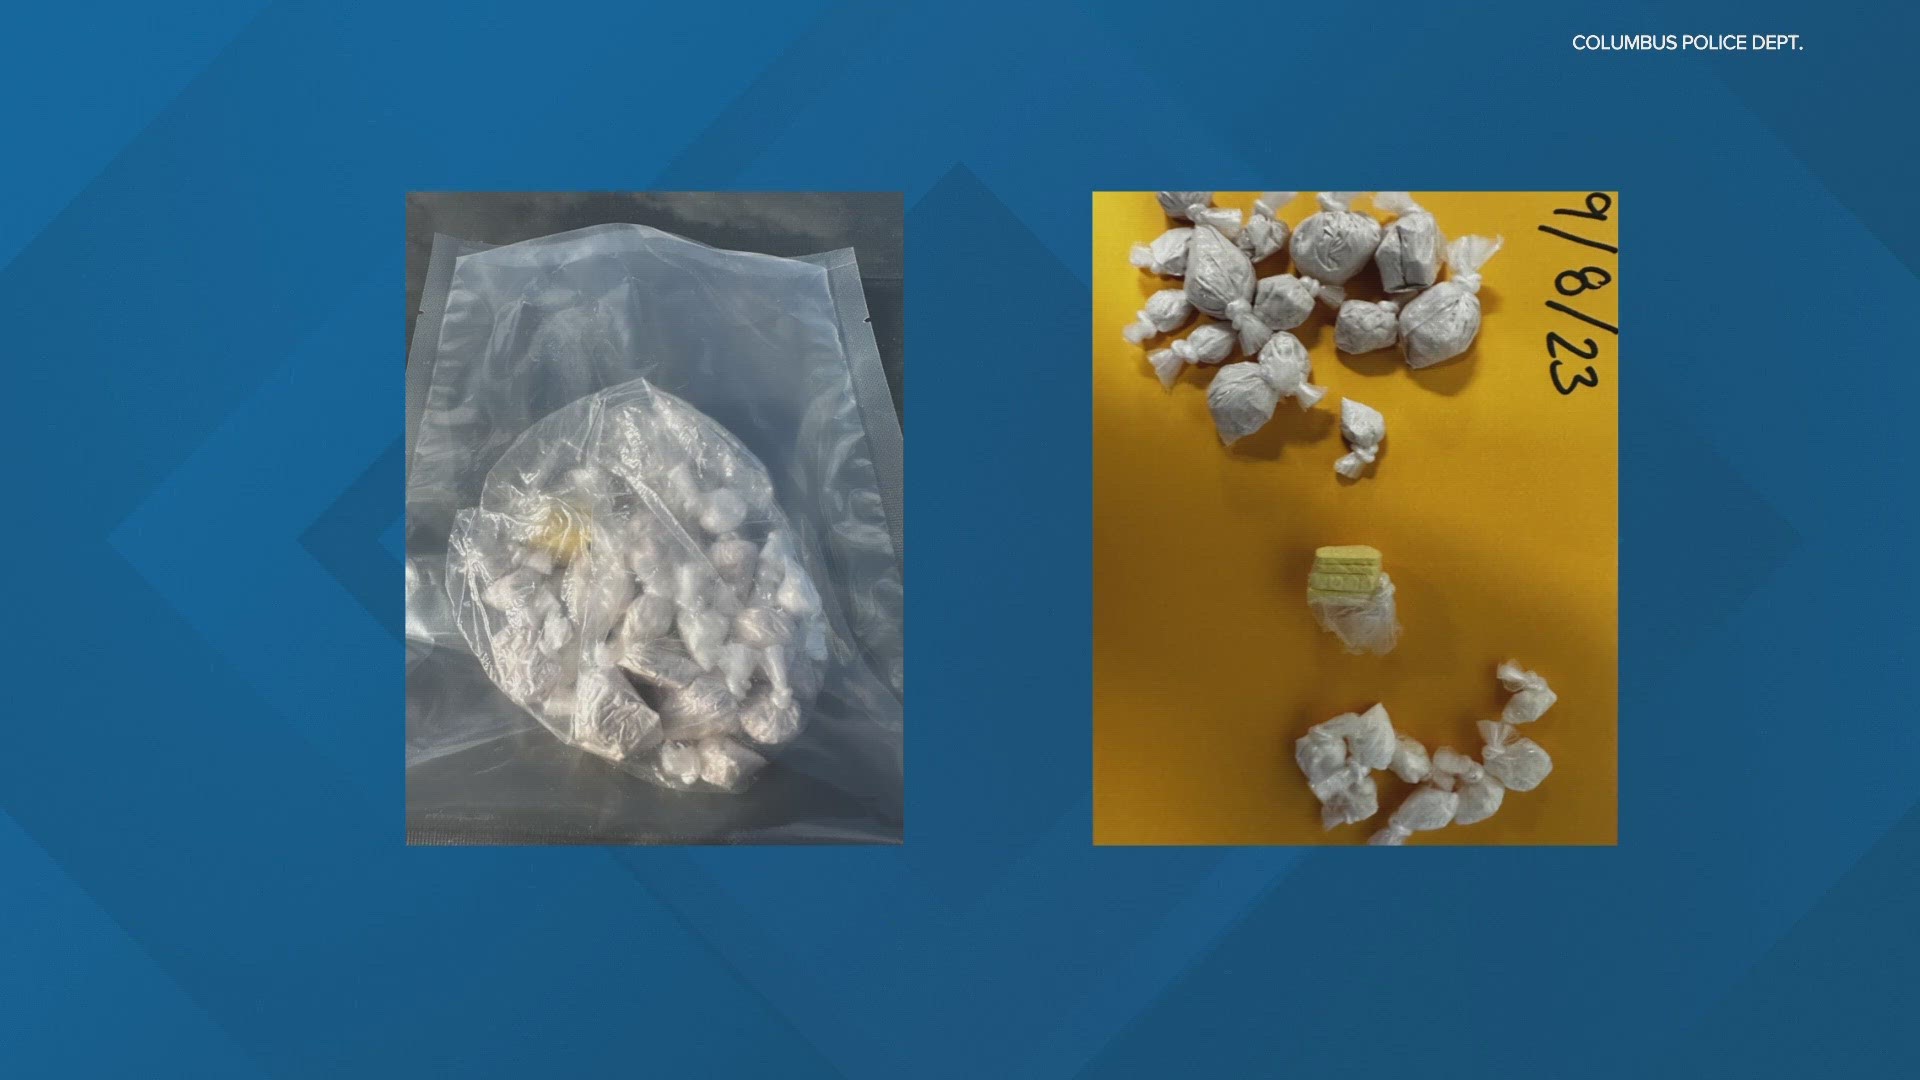 After weeks of investigation police arrested the two suspects in Shelby County and found several bags of fentanyl, cocaine and xanax that were packaged to sell.